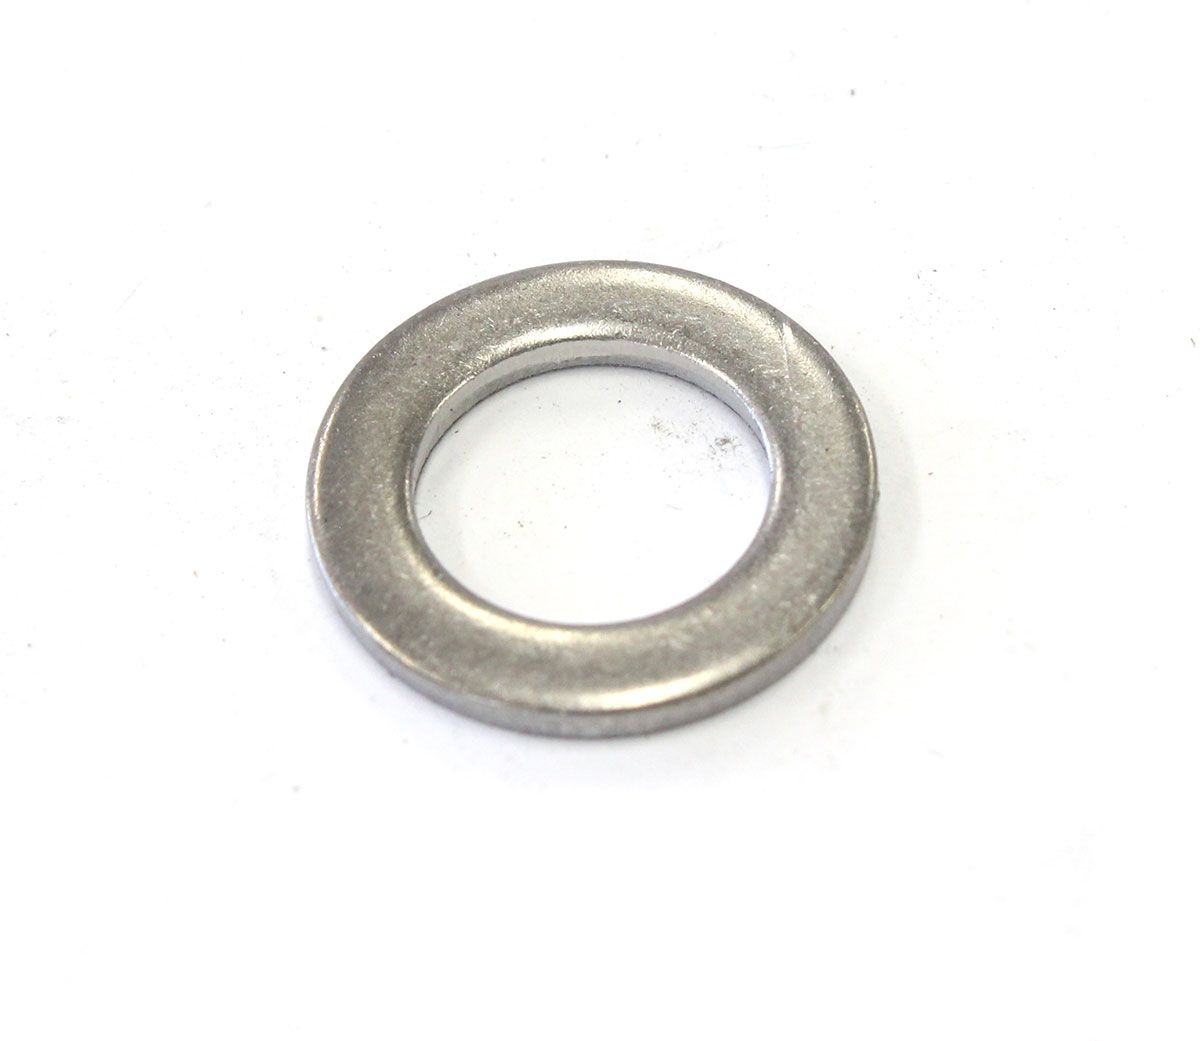 SPPSSW-375 - 3/8 AN WASHER STAINLESS STEEL